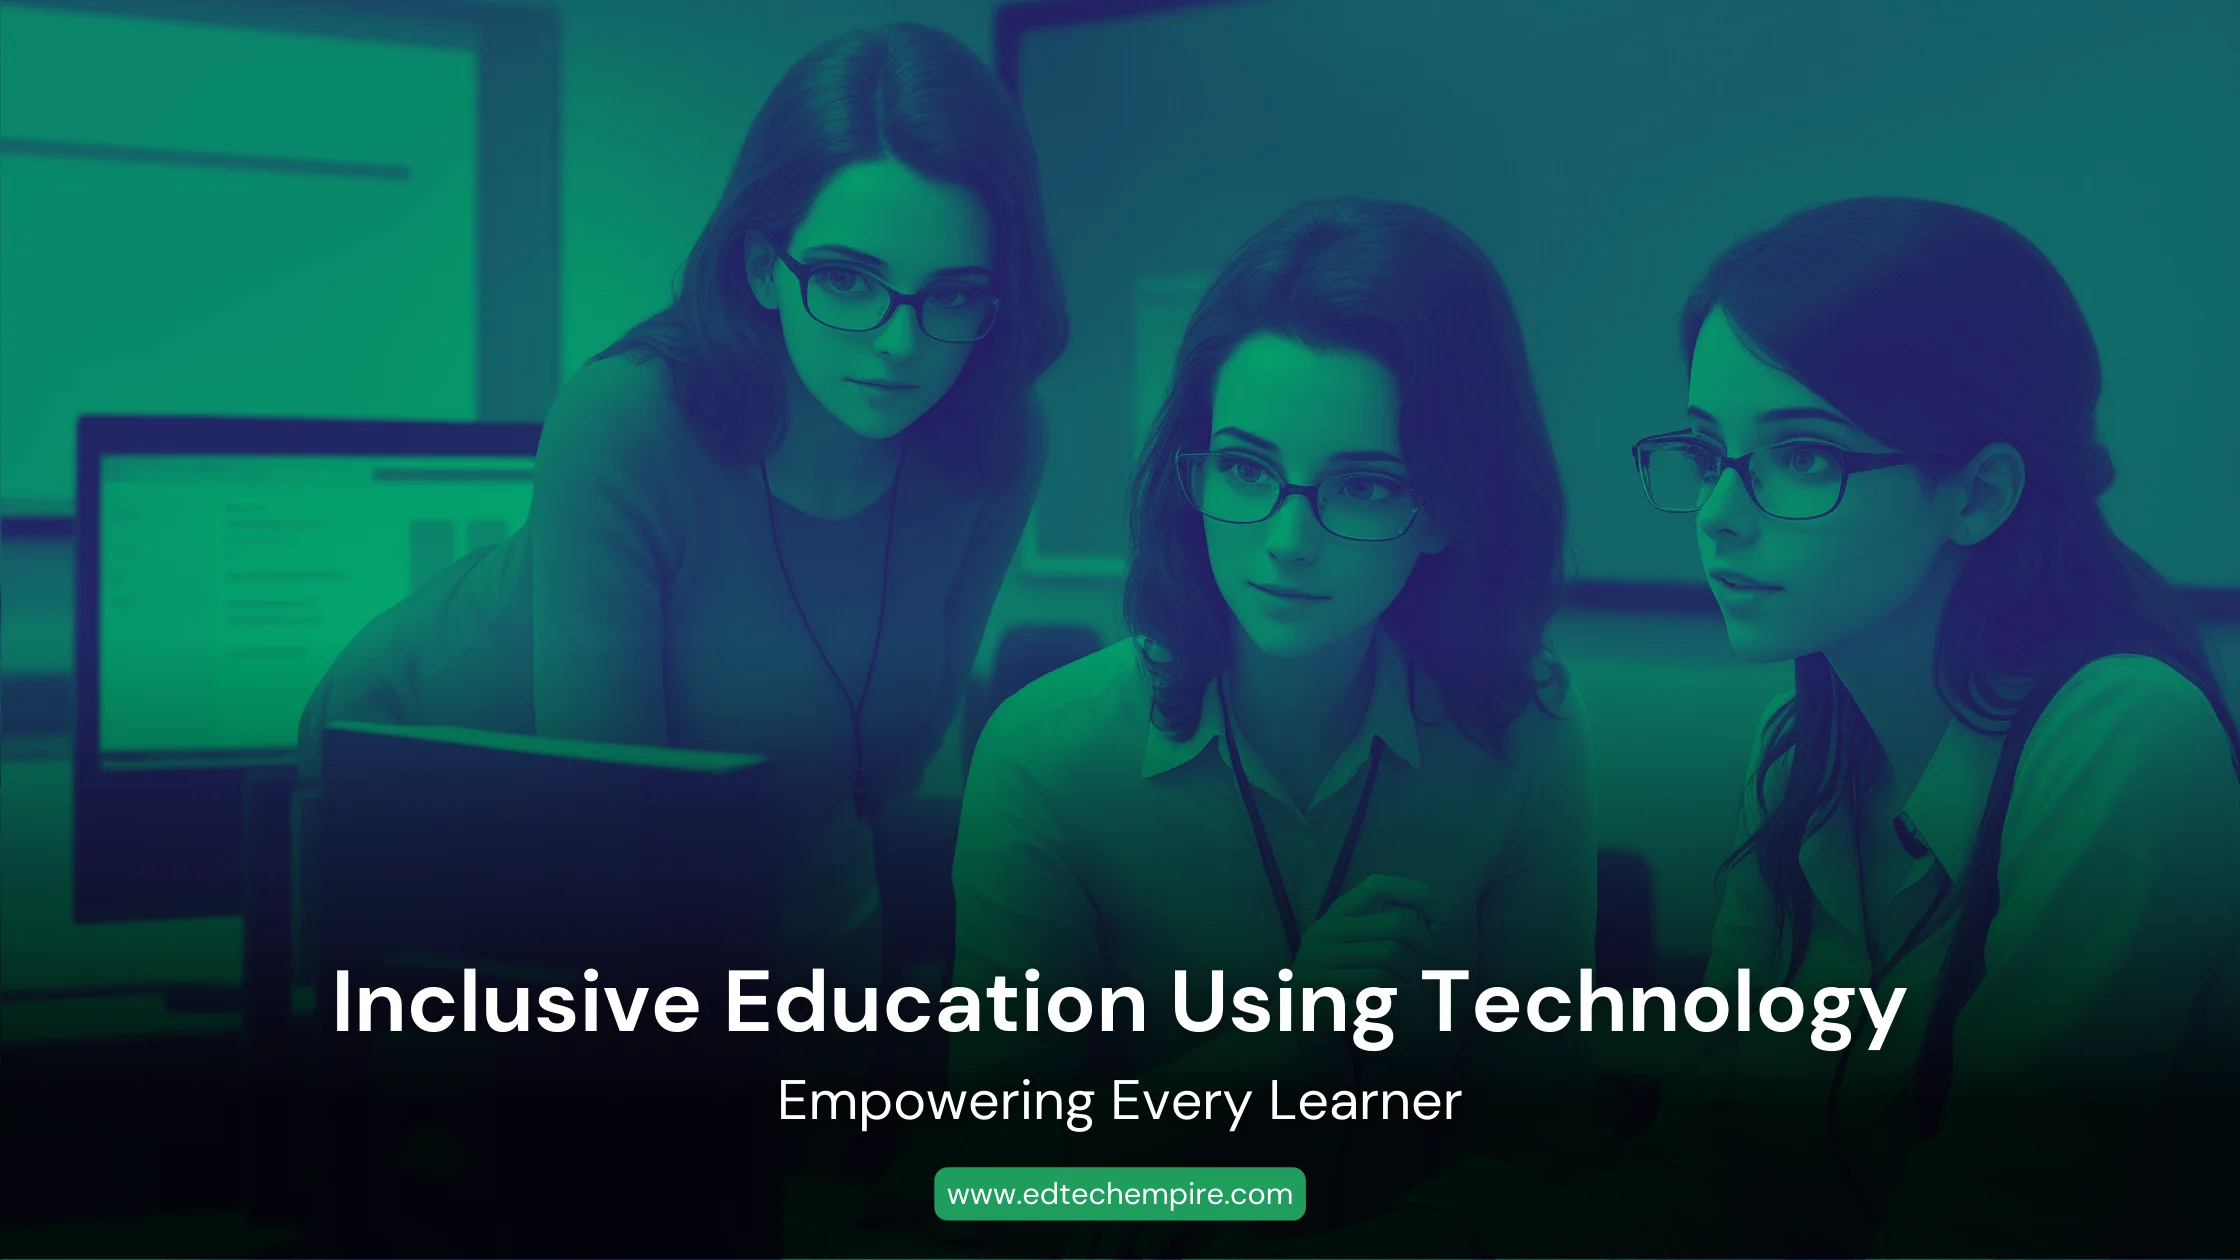 Inclusive Education Using Technology: Empowering Every Learner